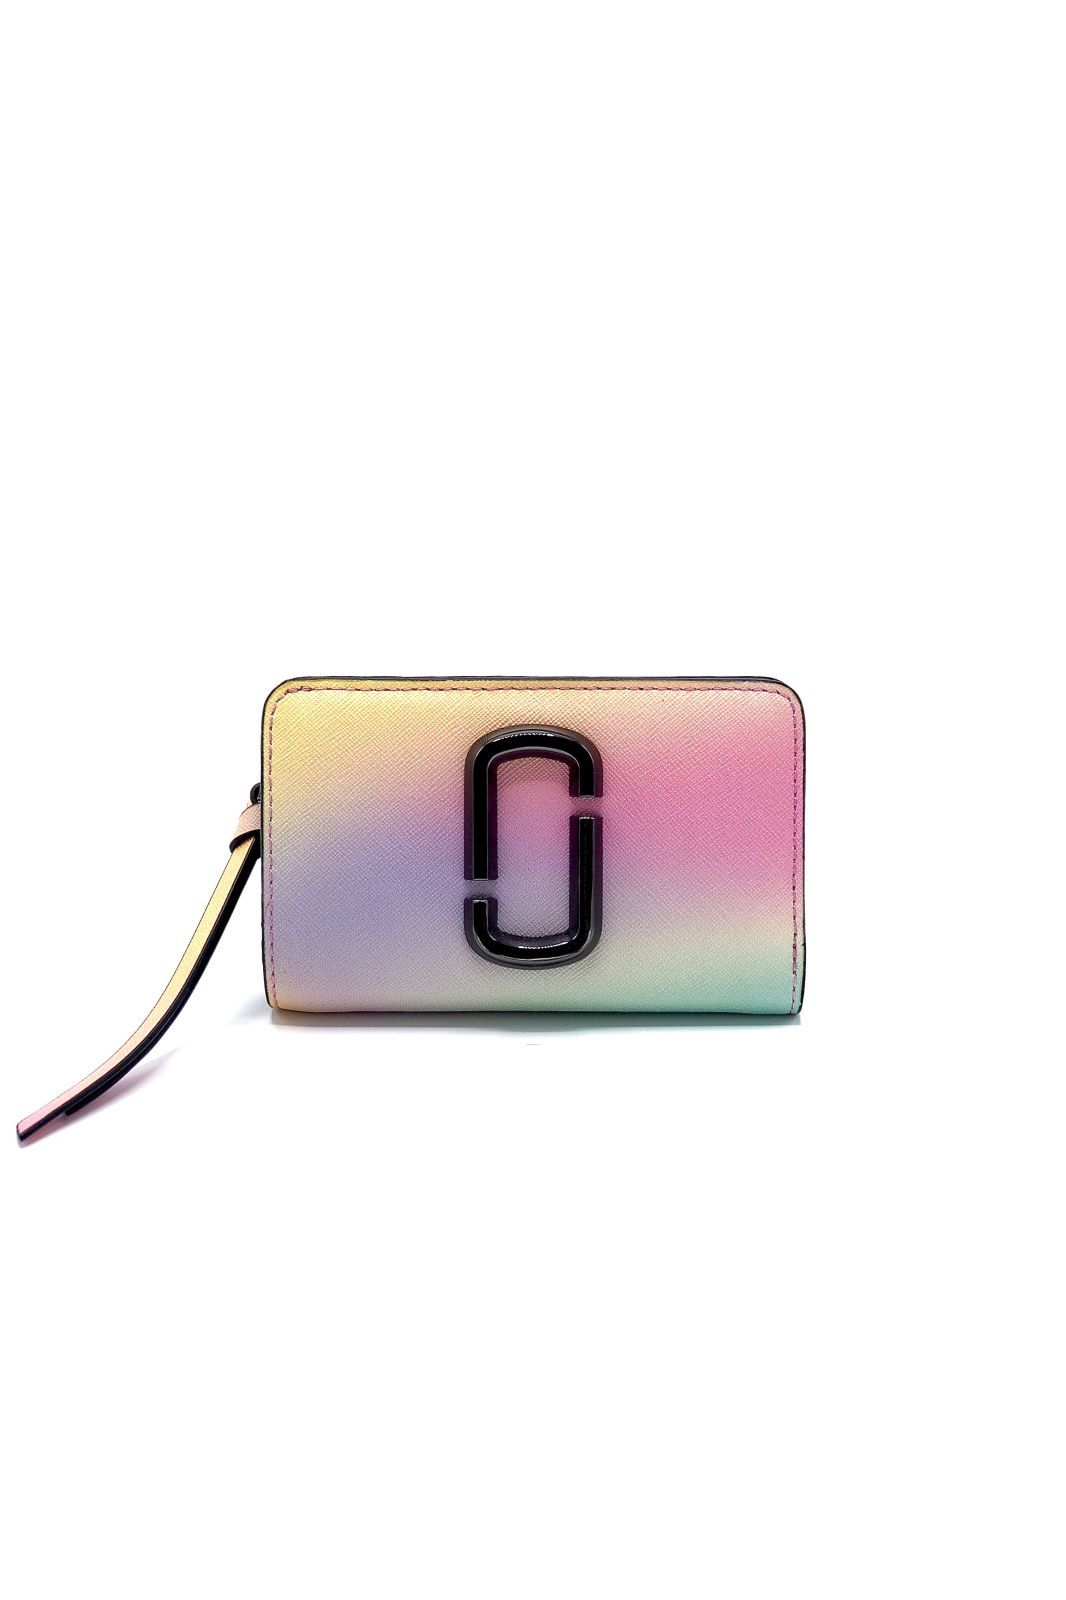 Marc Jacobs porte feuilles Multicolor femmes (MJACOBS-SNAPSHOT PF - COMPACT WALLET licorne) - Marine | Much more than shoes